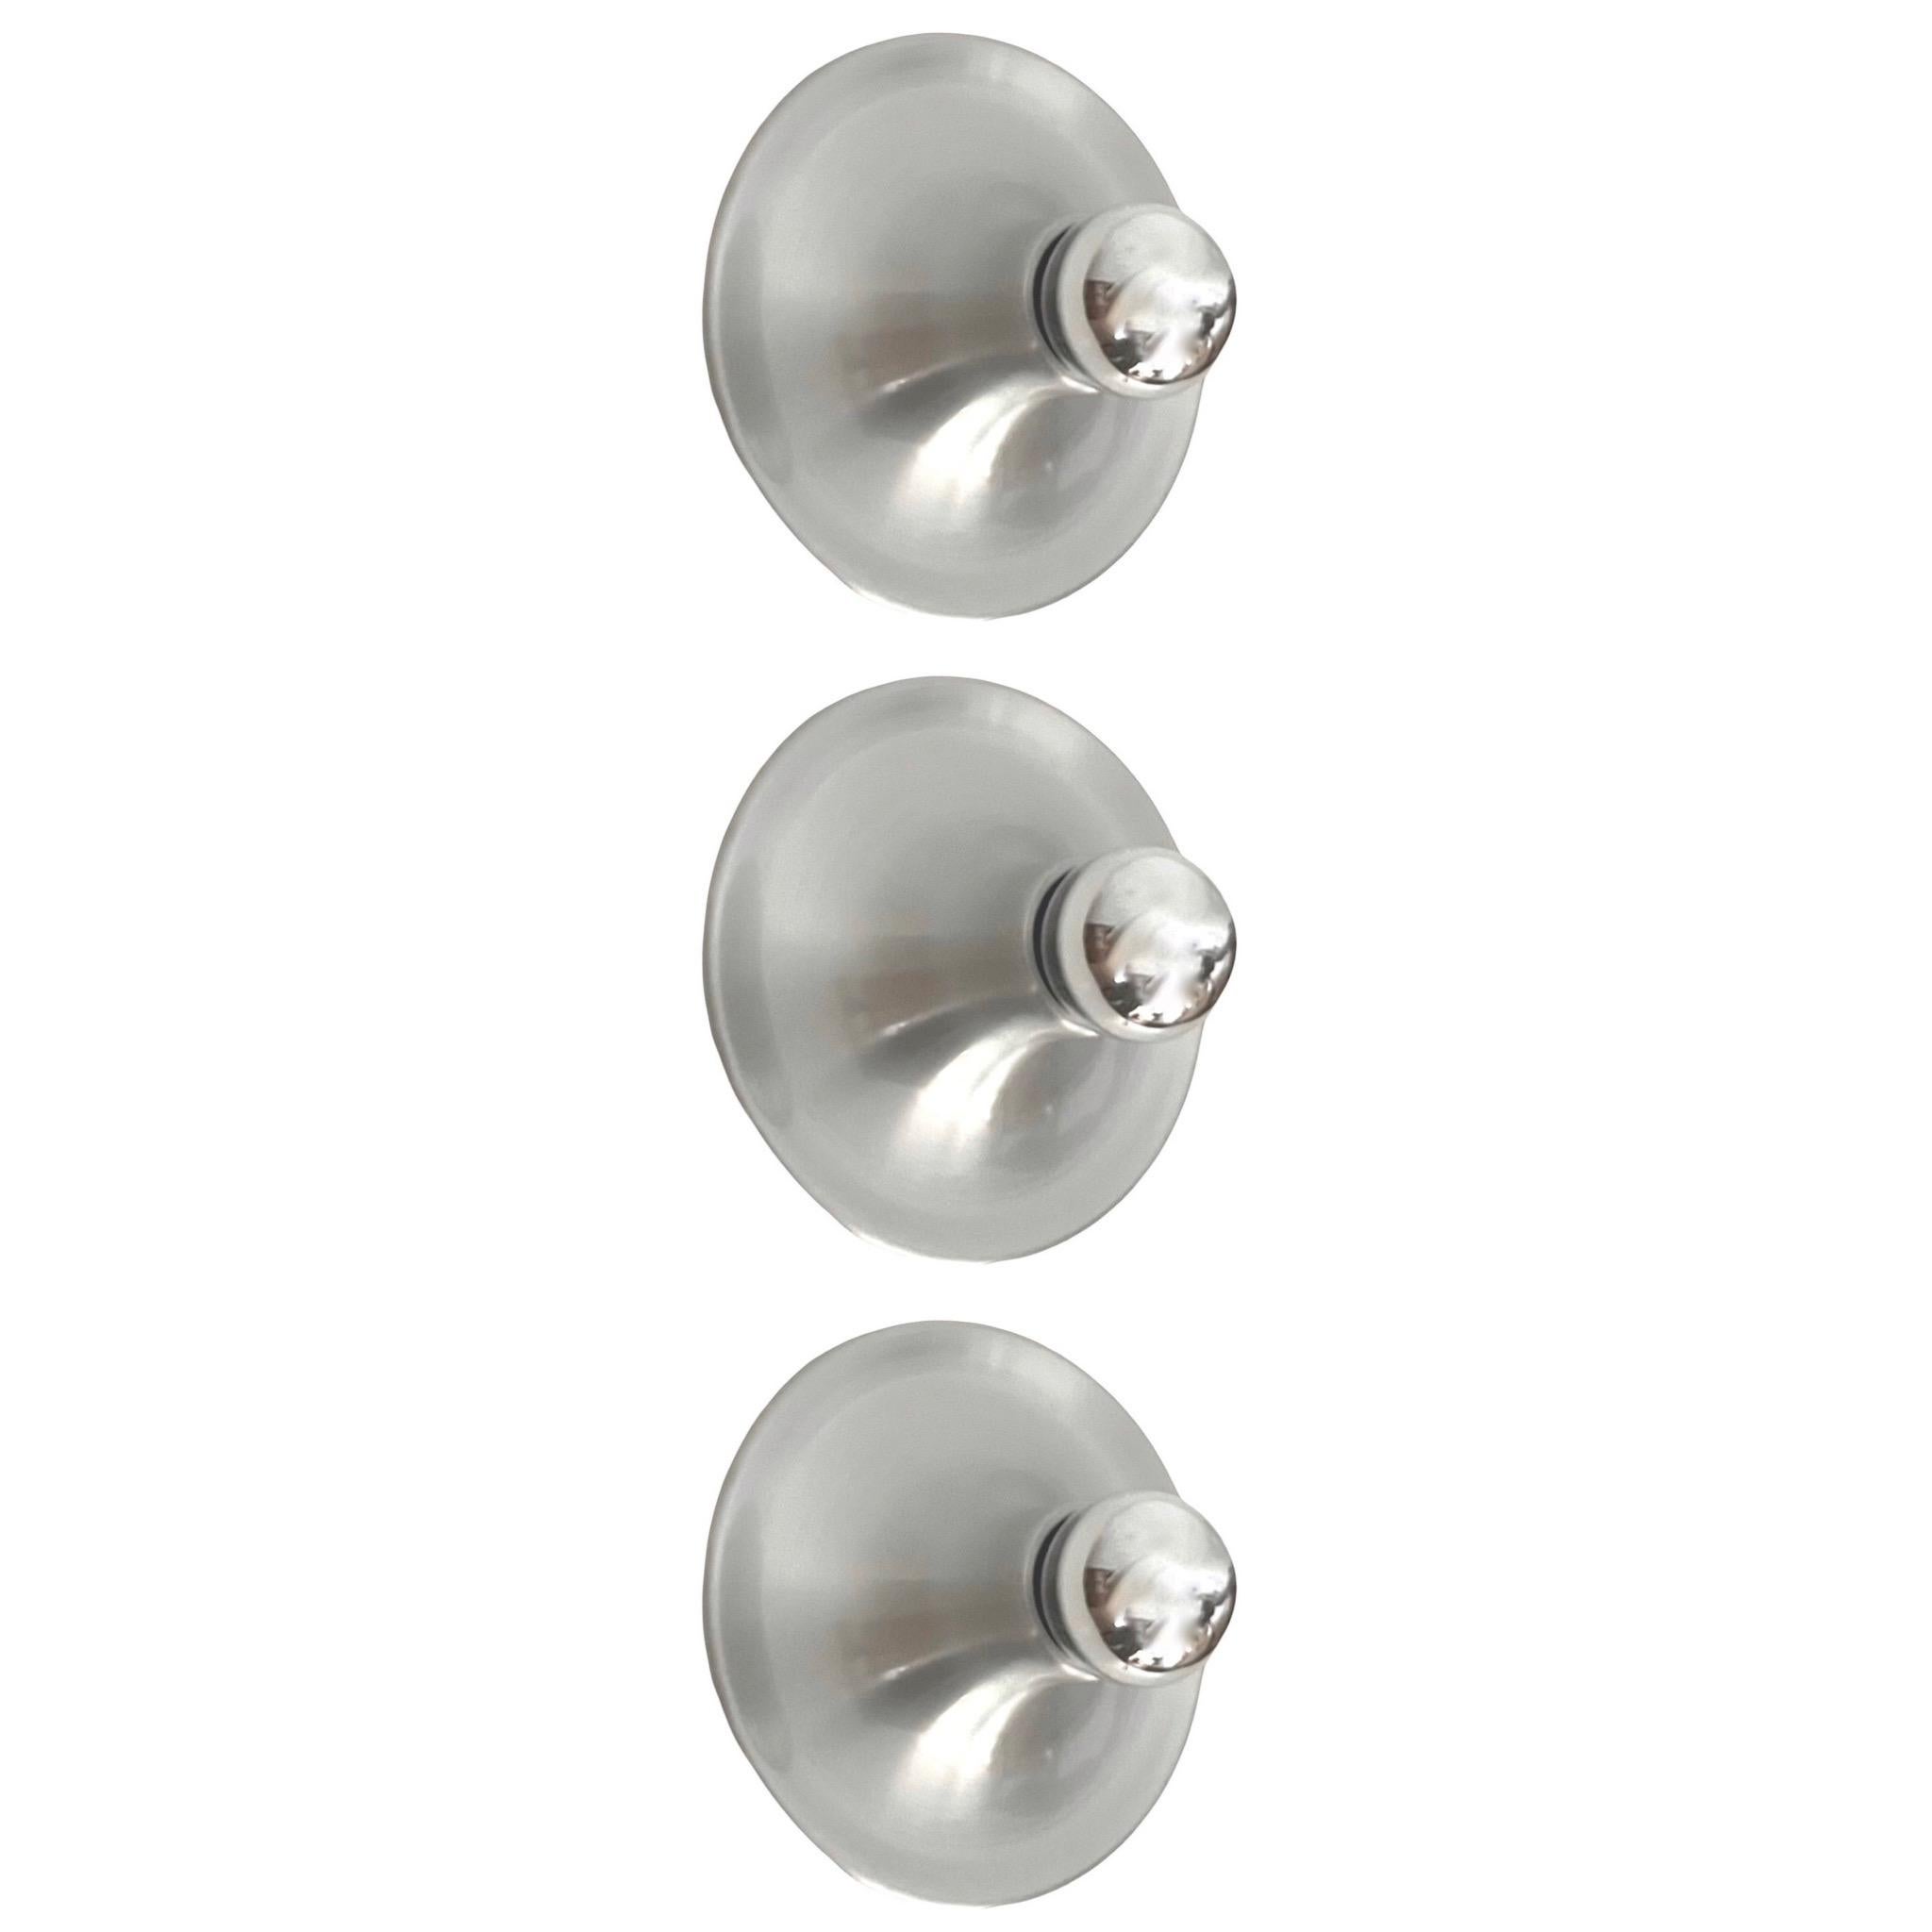 Cool Set of Three Metal Wall Sconces or Flush Mounts by Targetti Sankey. Model: 3076406. These fixtures were designed and manufactured in Italy during 1980s
These fixtures have never been used, the condition is very good. “Targetti” original sticker